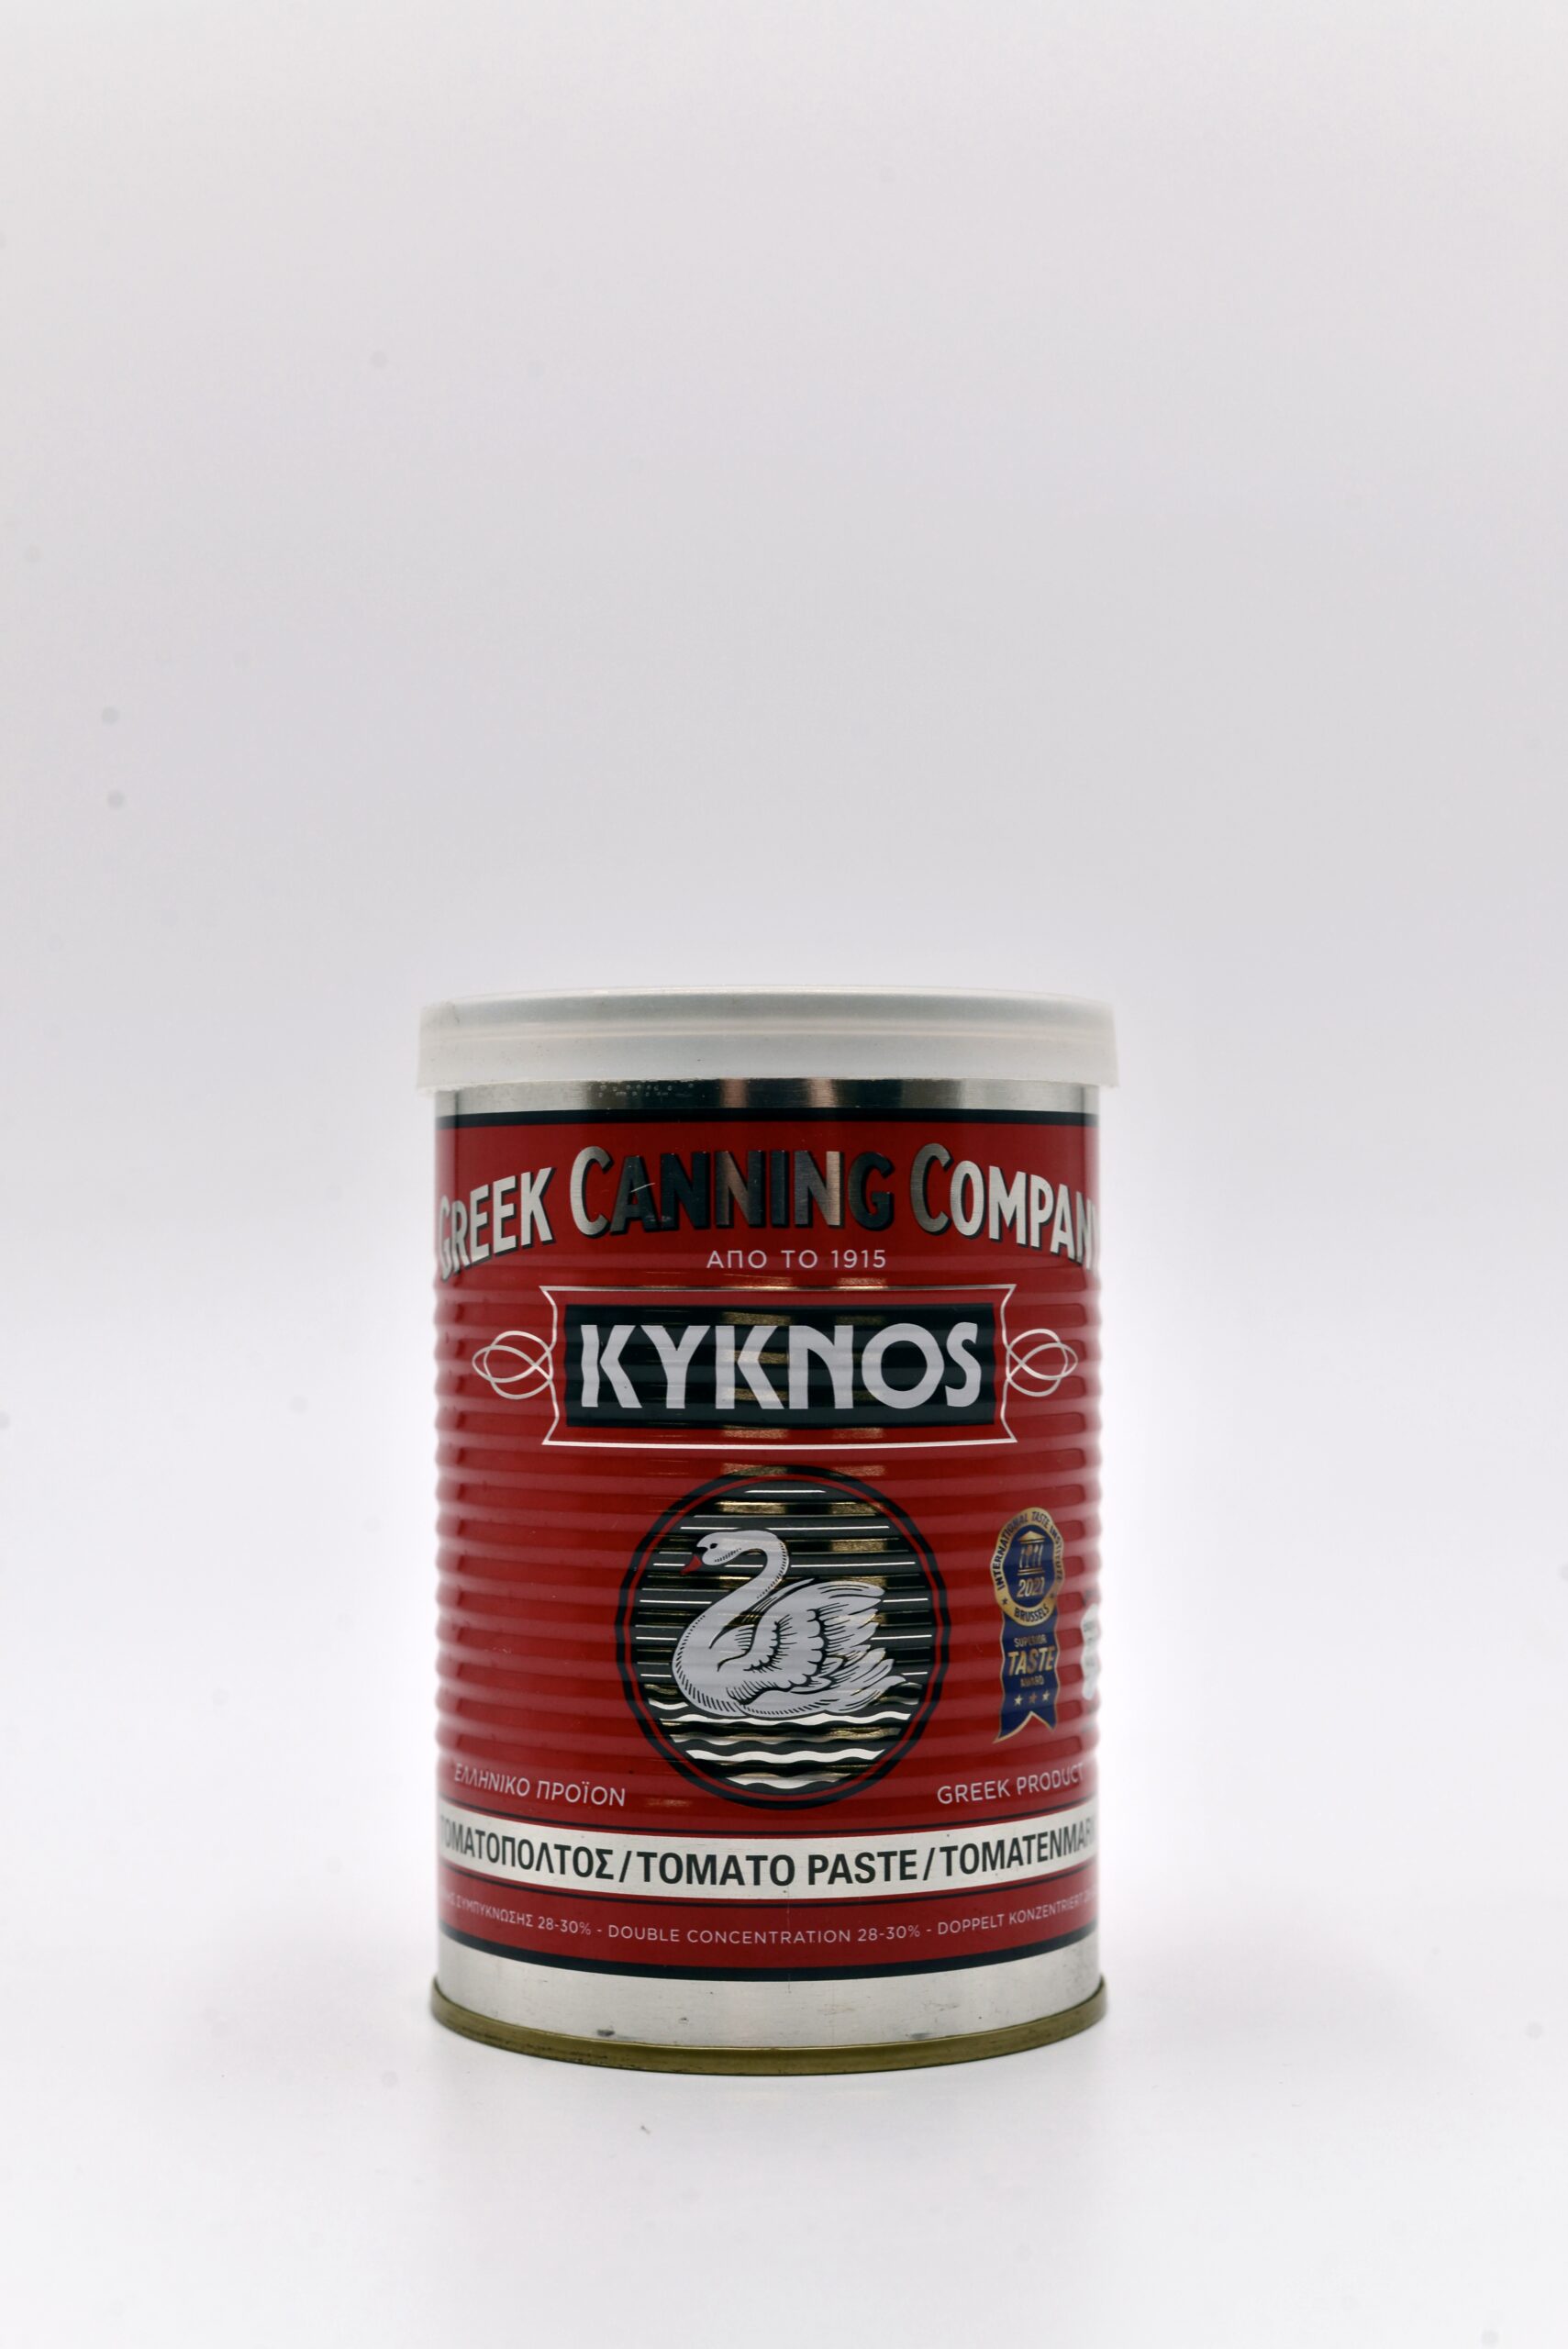 Kyknos Tomato Paste Double Concentration